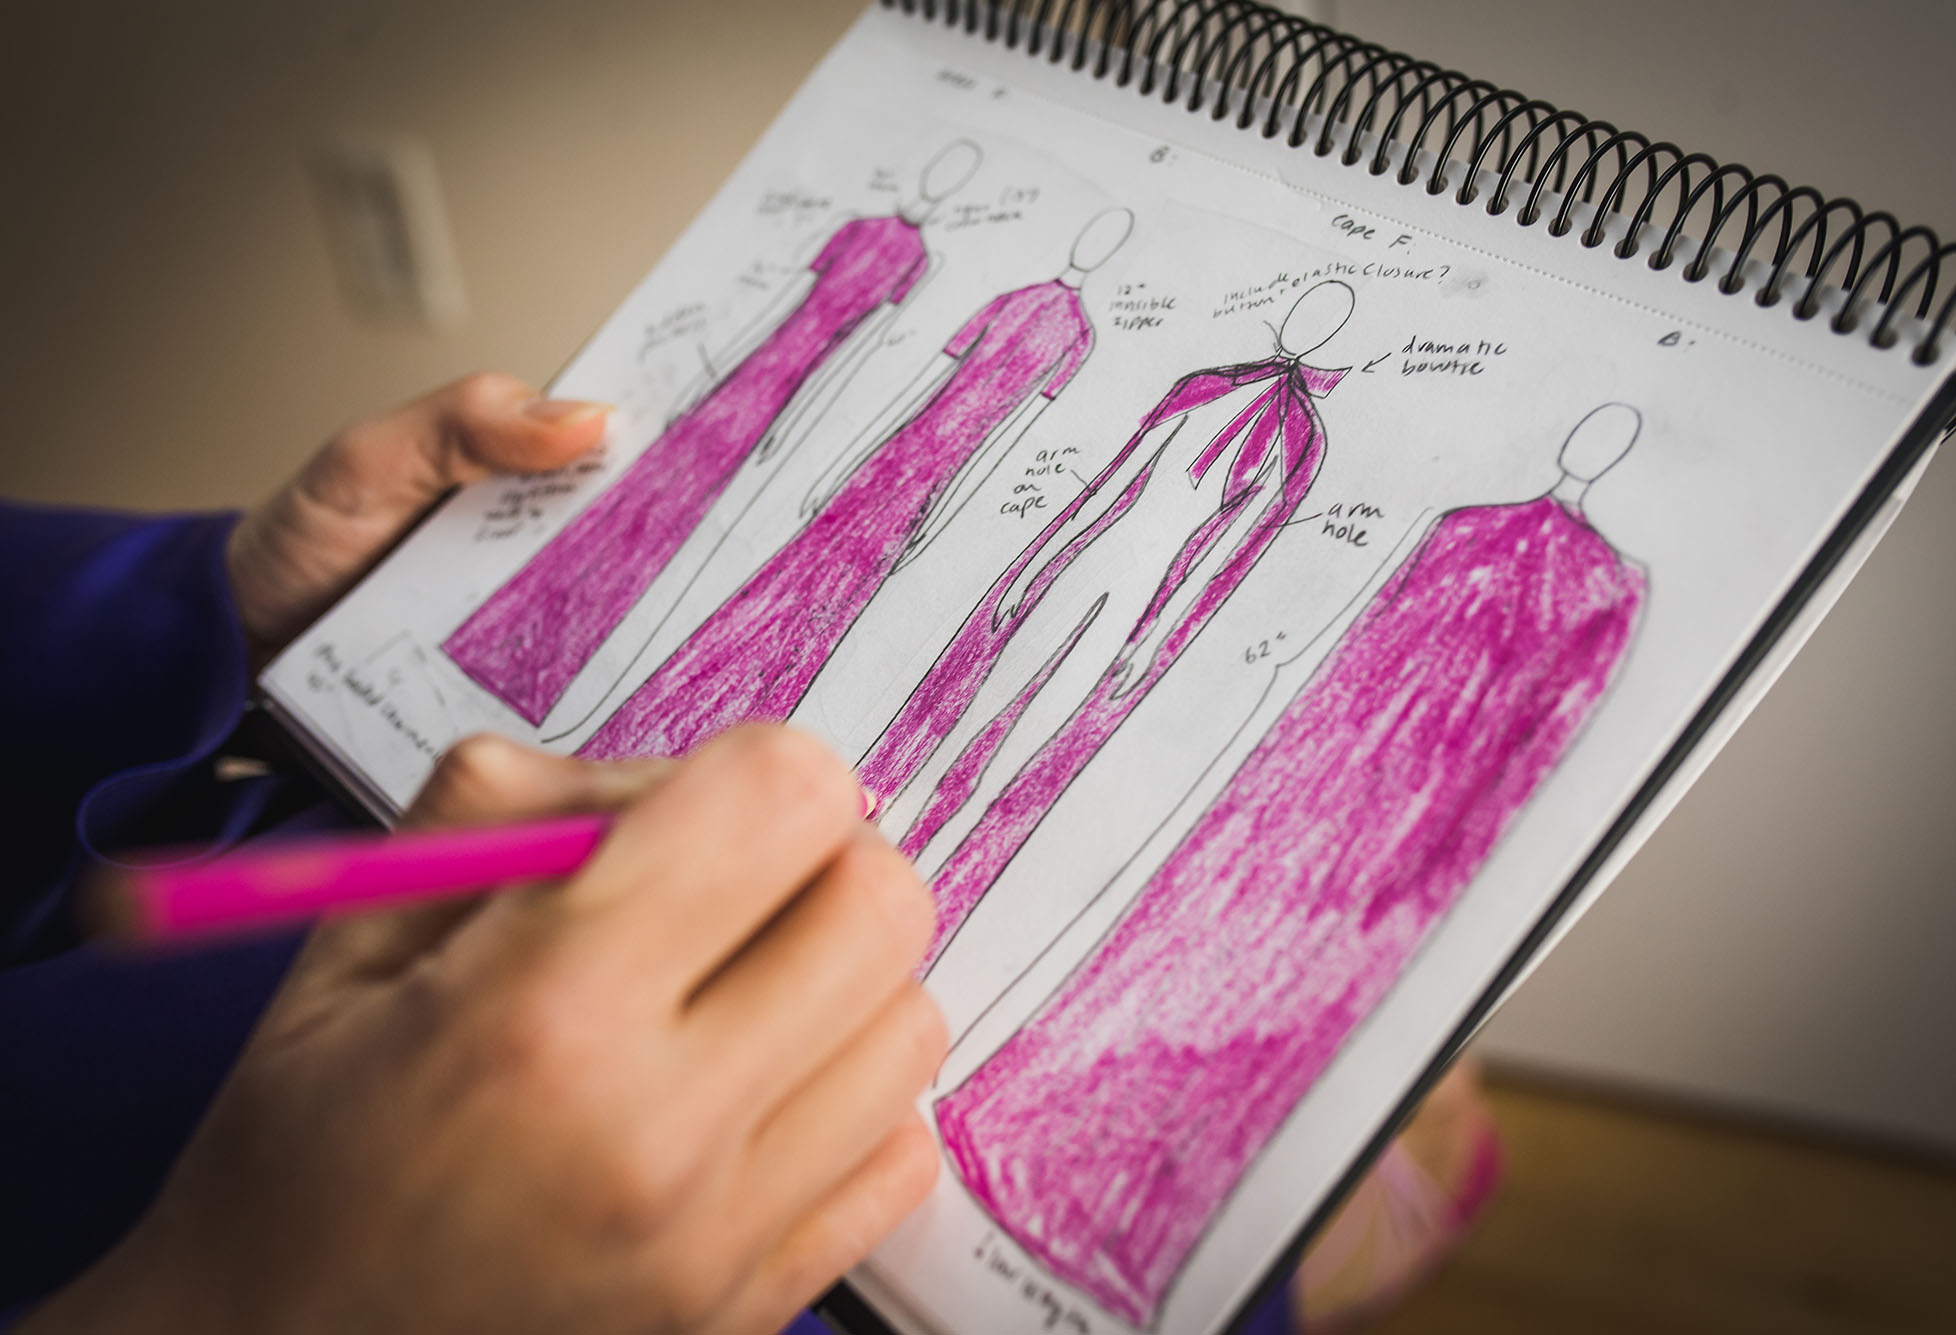 Photo: Hammouda sketching her Wendy cape and Rosemarie dress. Fuchsia pink dress is sketched on a medium-sized sketchpad as hands fill in rough drawings with the color.